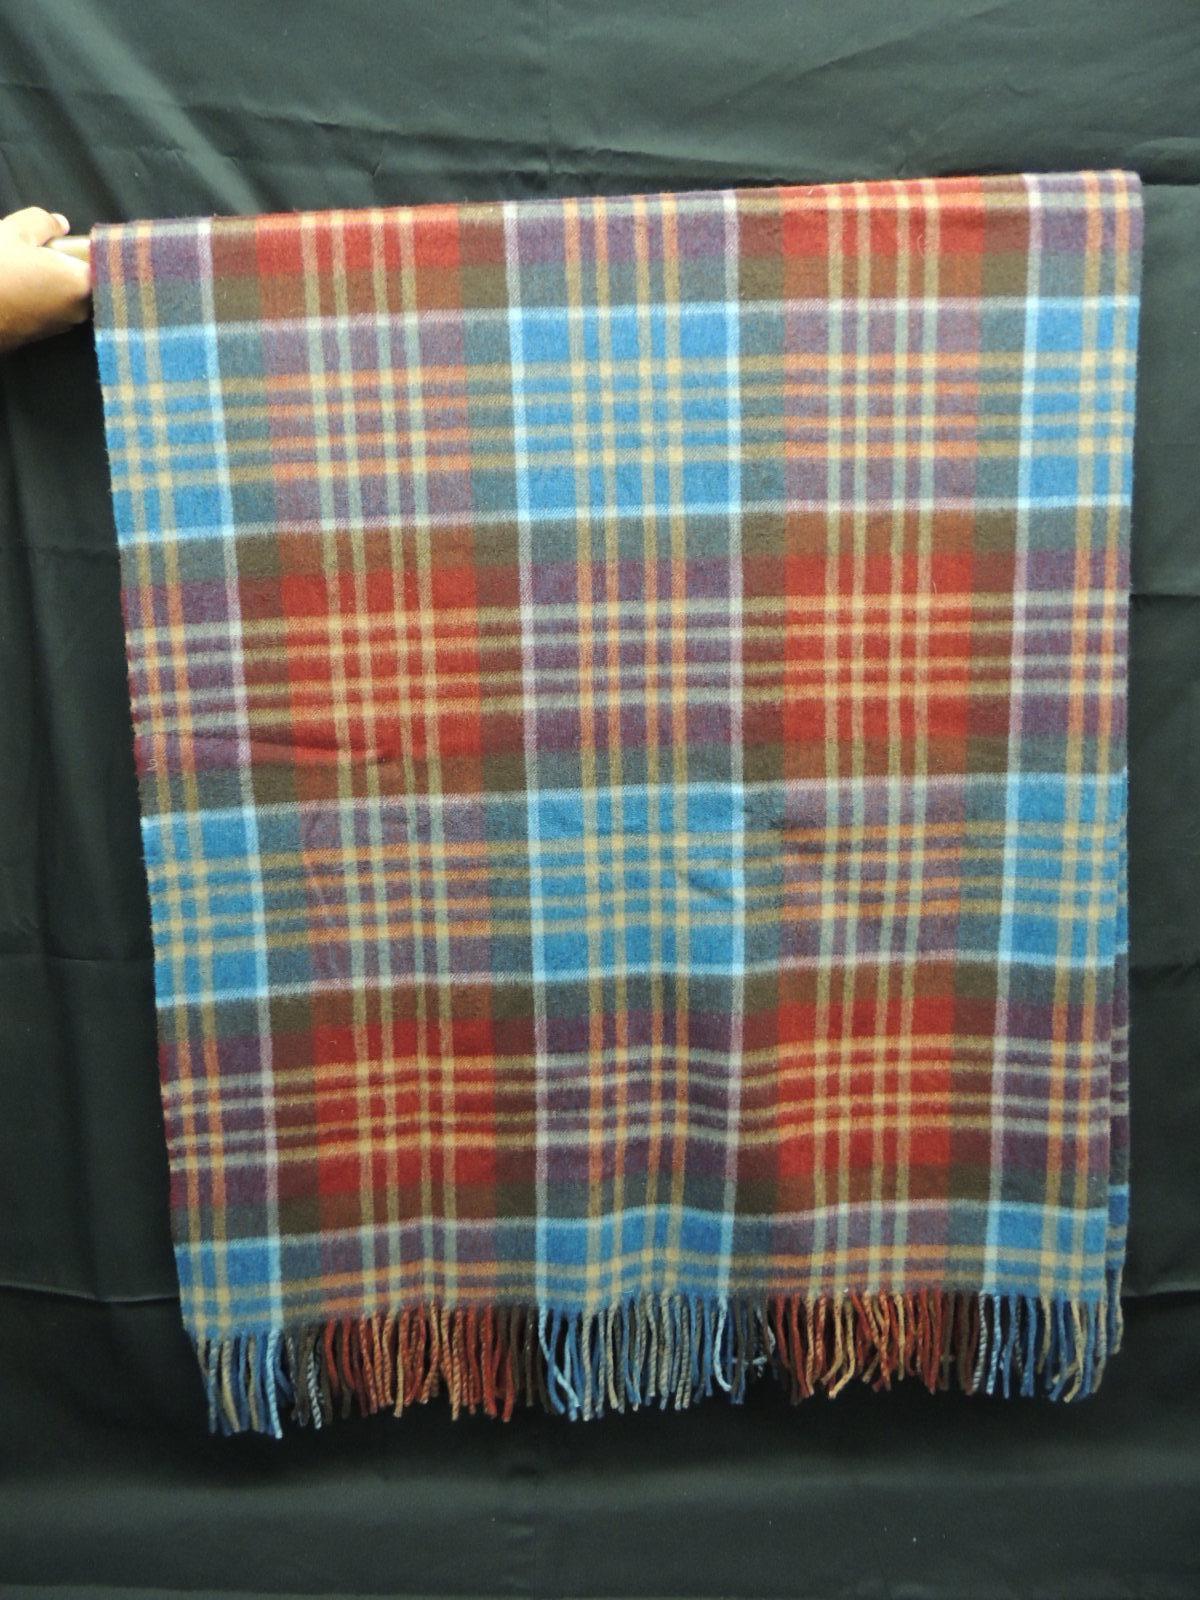 Vintage blue and orange wool plaid throw
with fringes.
Size: 59.5